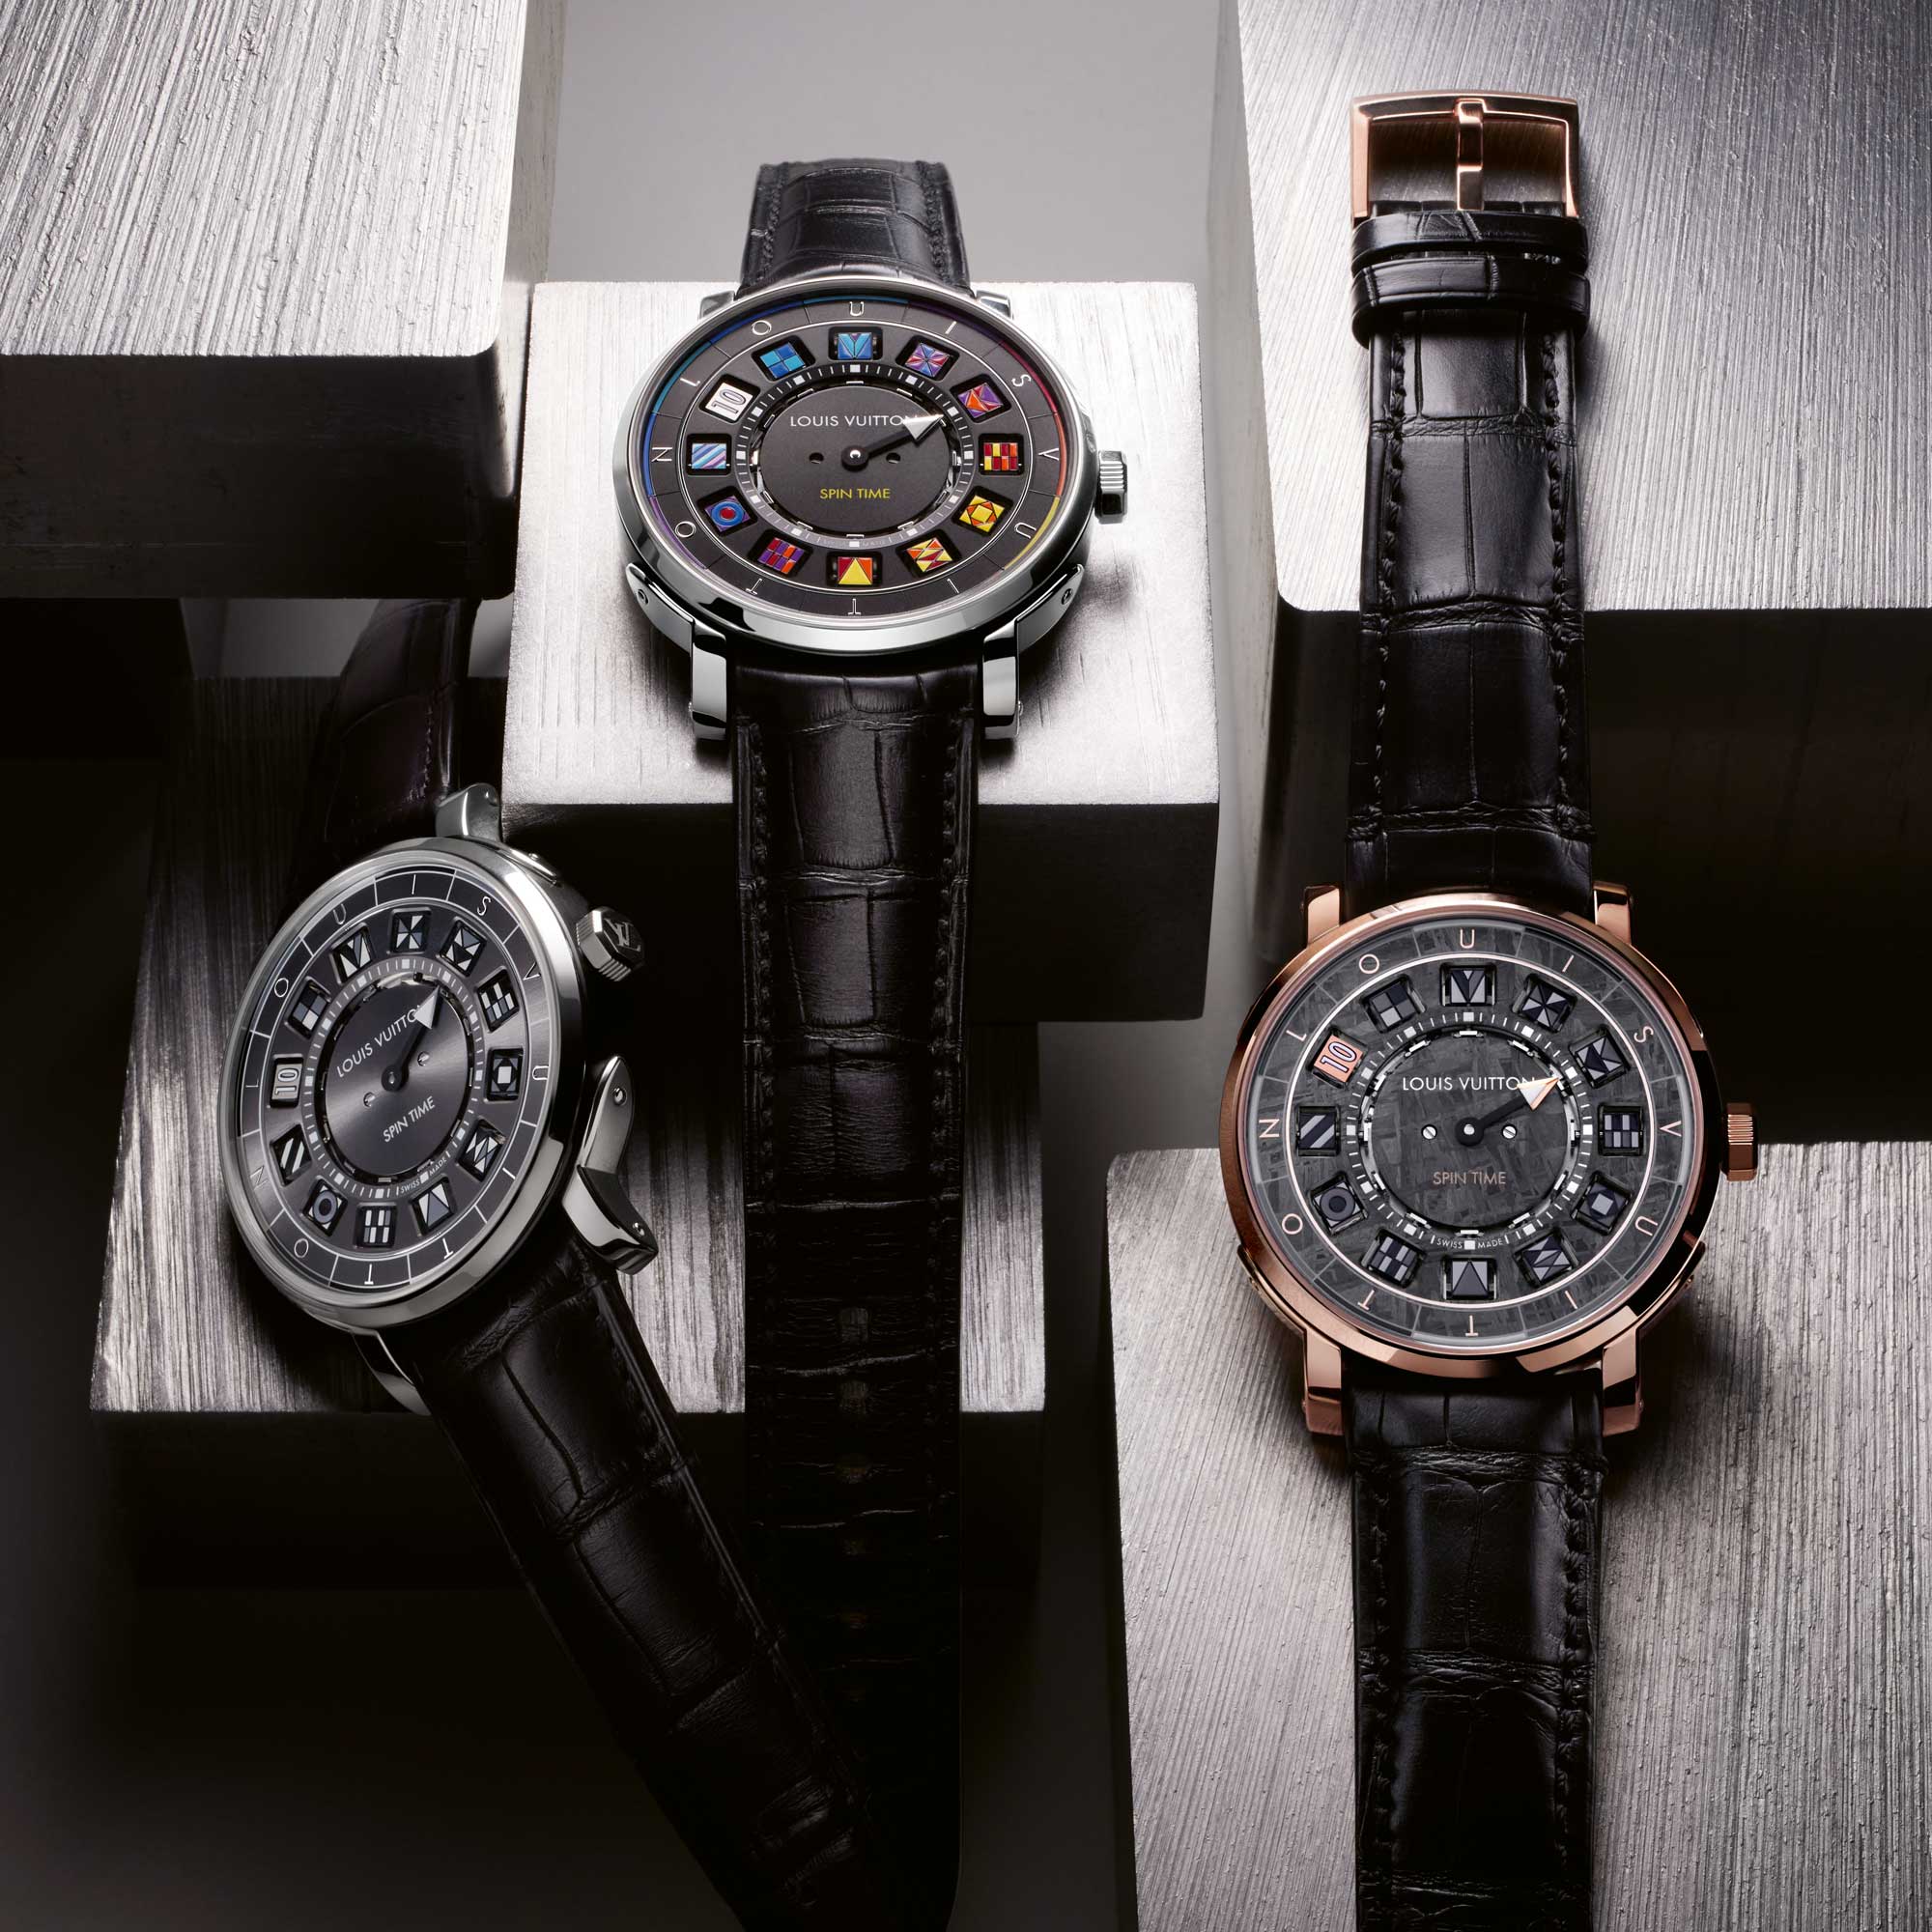 The 2022 Escale Spin Time collection is available for the first time in all-steel designs with a polished black PVD finish and the choice of a monochrome or rainbow colored time-telling complication